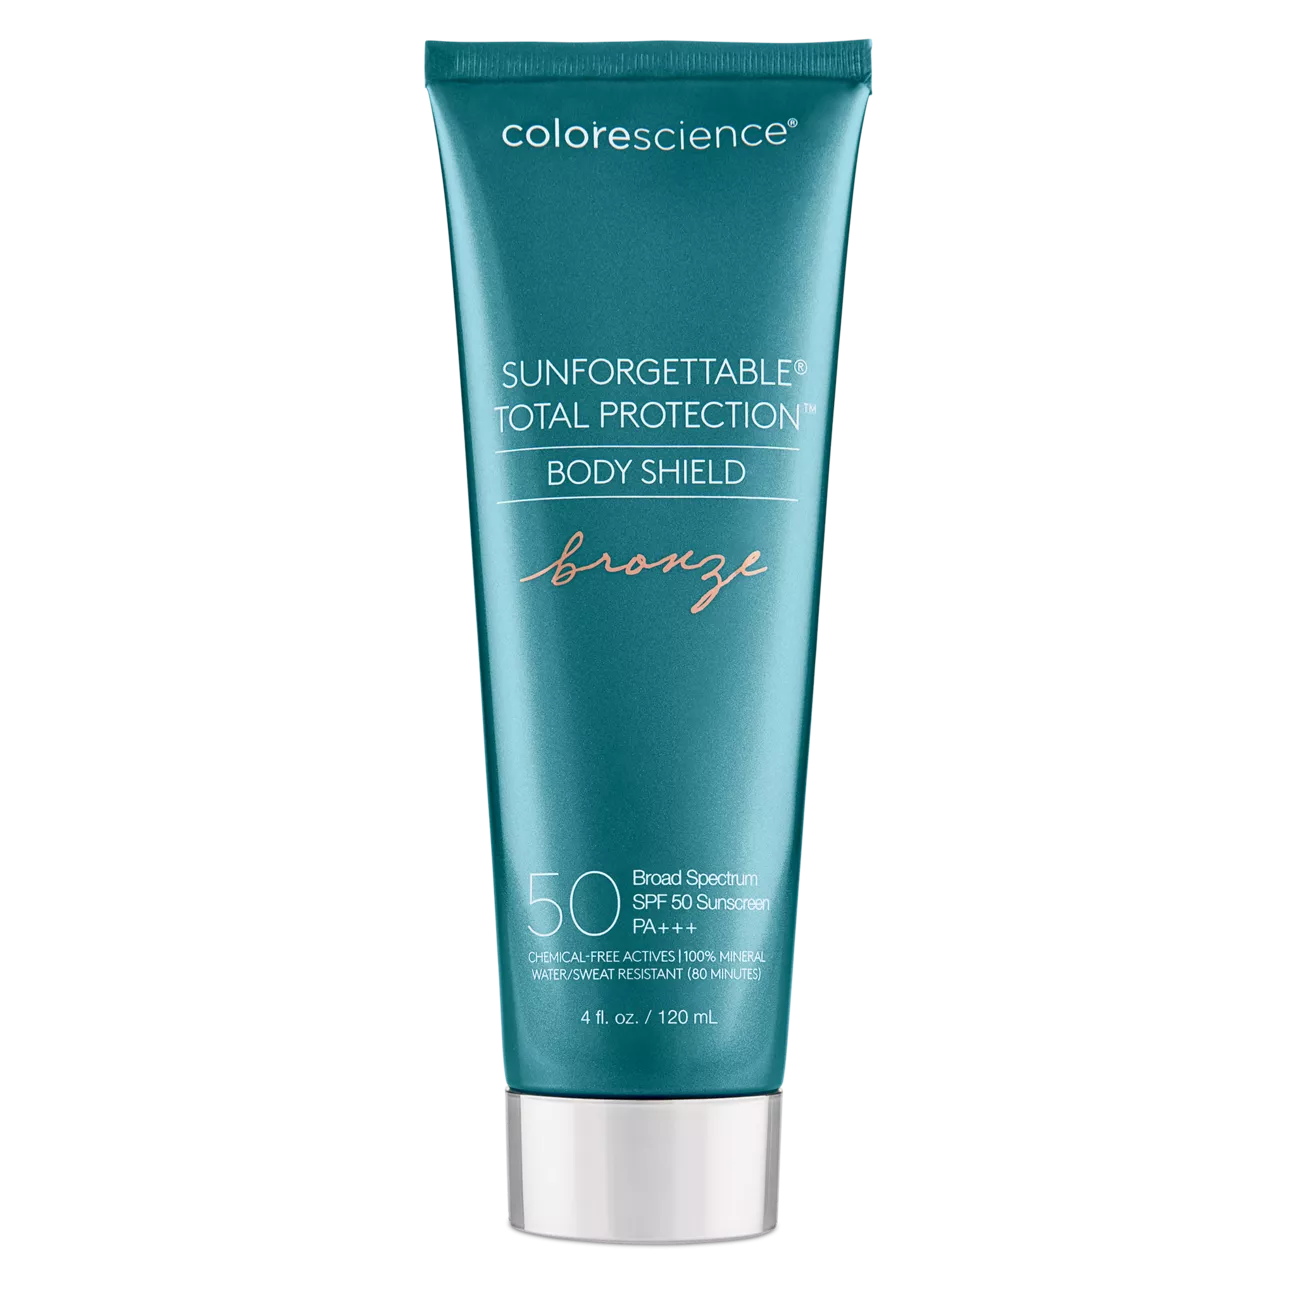 Colorescience, Sunforgettable Total Protection Body Shield Bronze